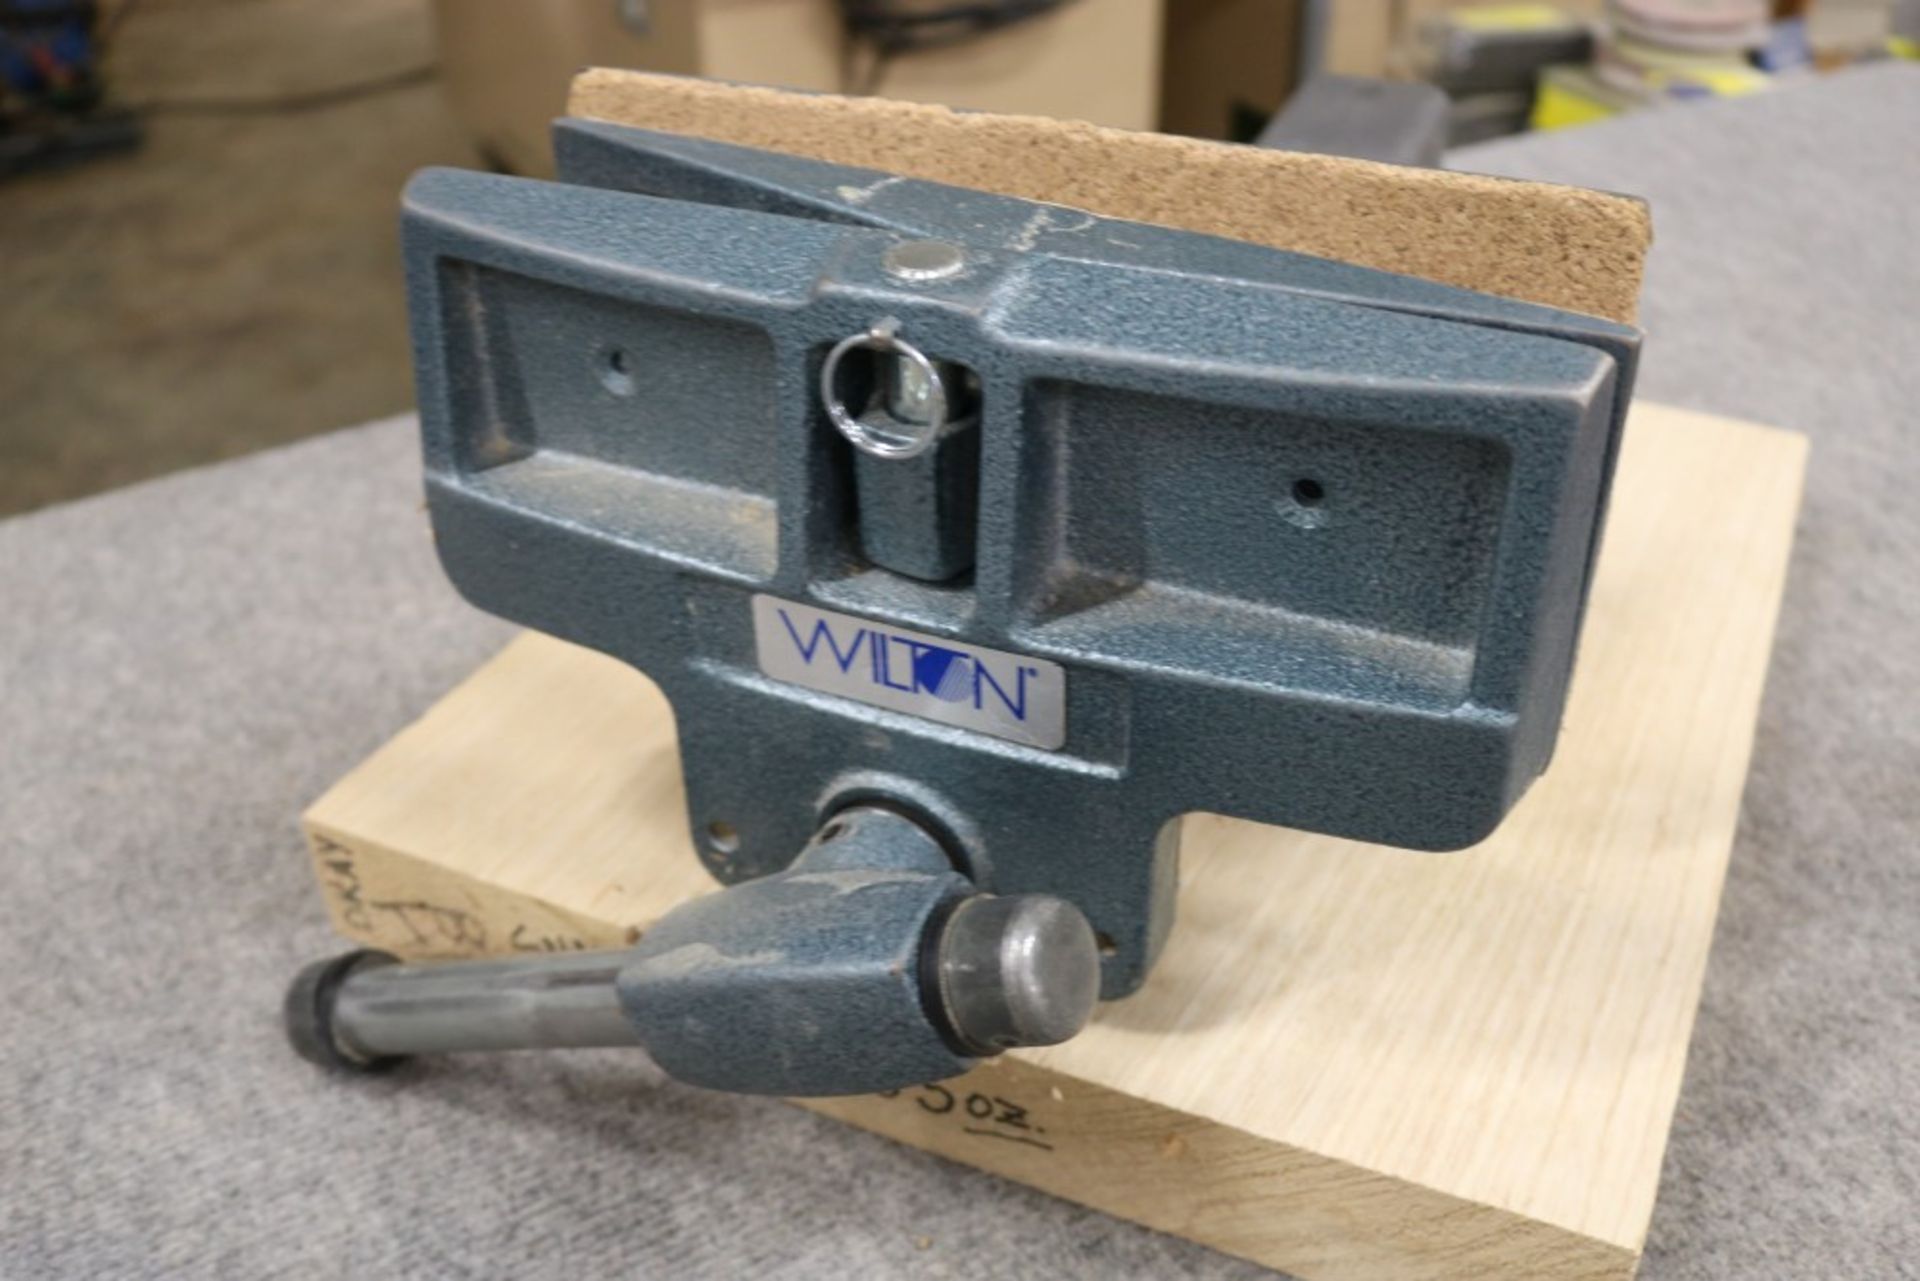 Wilton 10" Heavy Duty Vise and 4" Table Top 90 Degree Swivel Vise - Image 3 of 7